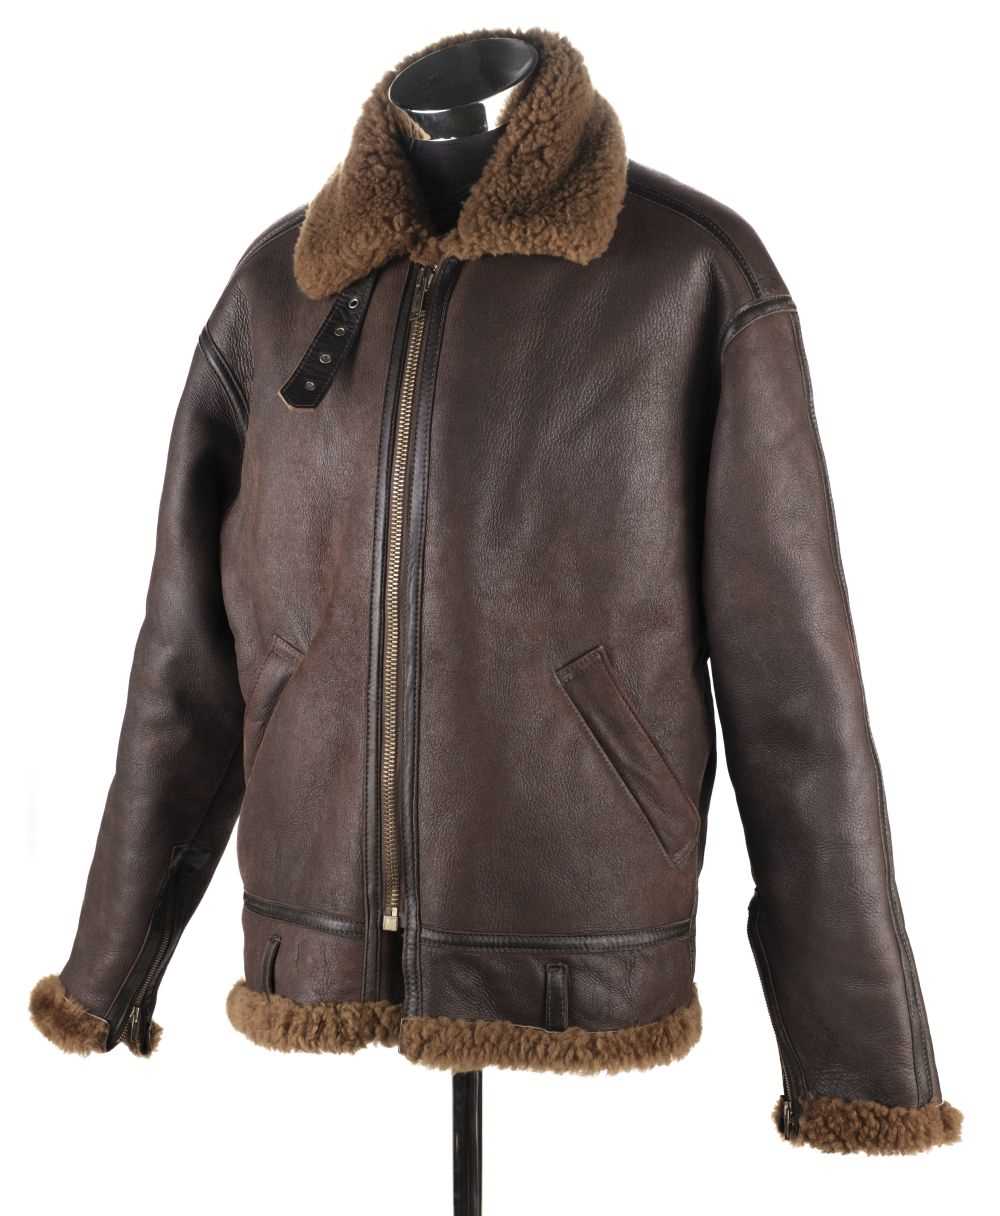 Lot 162 - Flying Jacket. WWII style leather flying